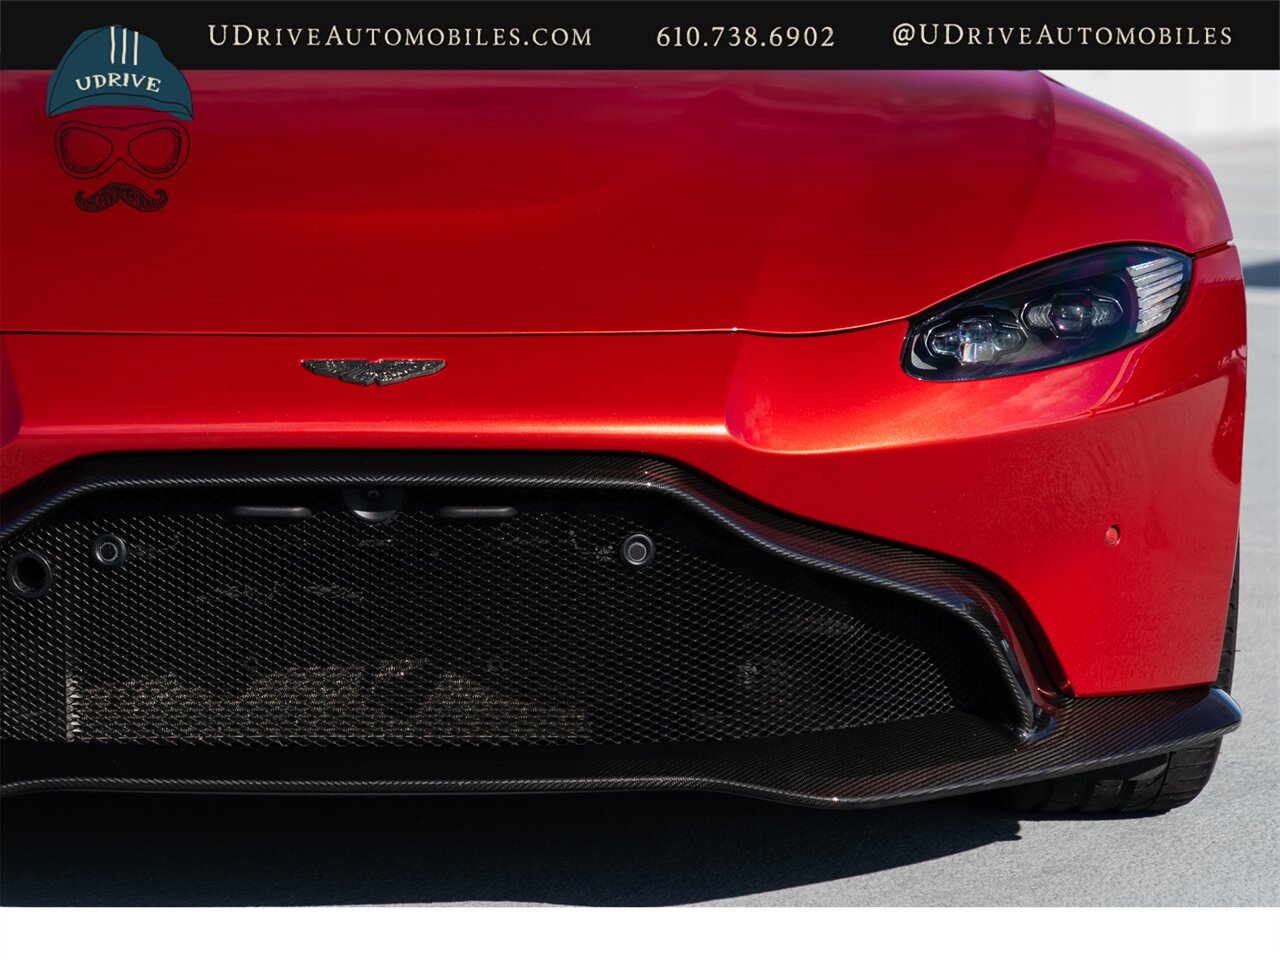 2019 Aston Martin Vantage  Incredibly Spec Rare Q Exclusive Fiamma Red $222k MSRP 1 of a Kind CPO - Photo 13 - West Chester, PA 19382